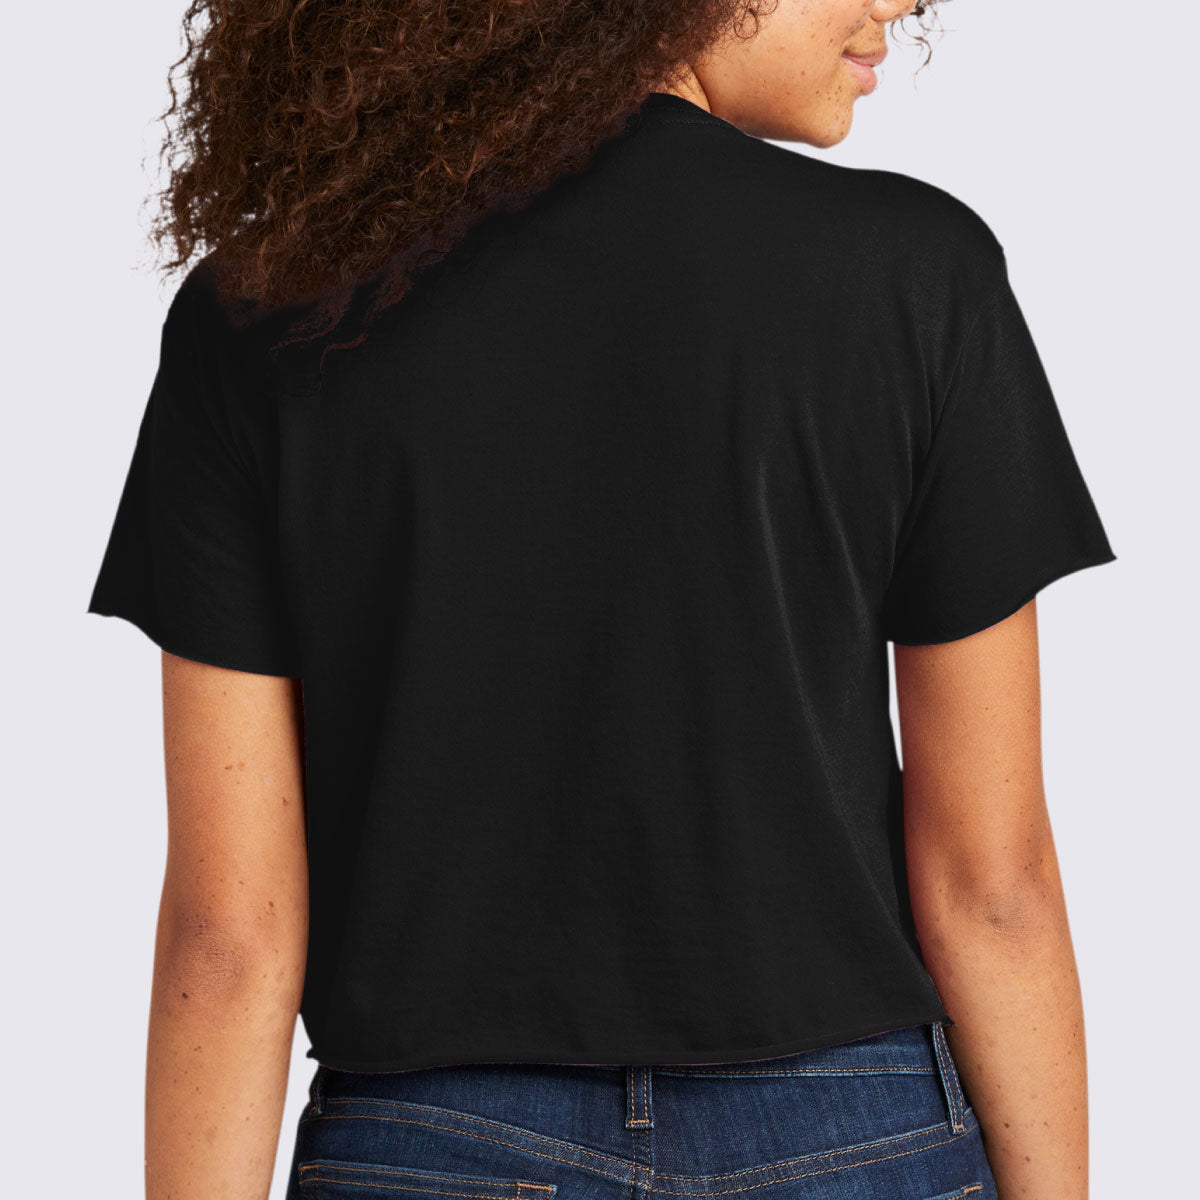 Barbell Holiday Women’s Festival Cali Crop Tee